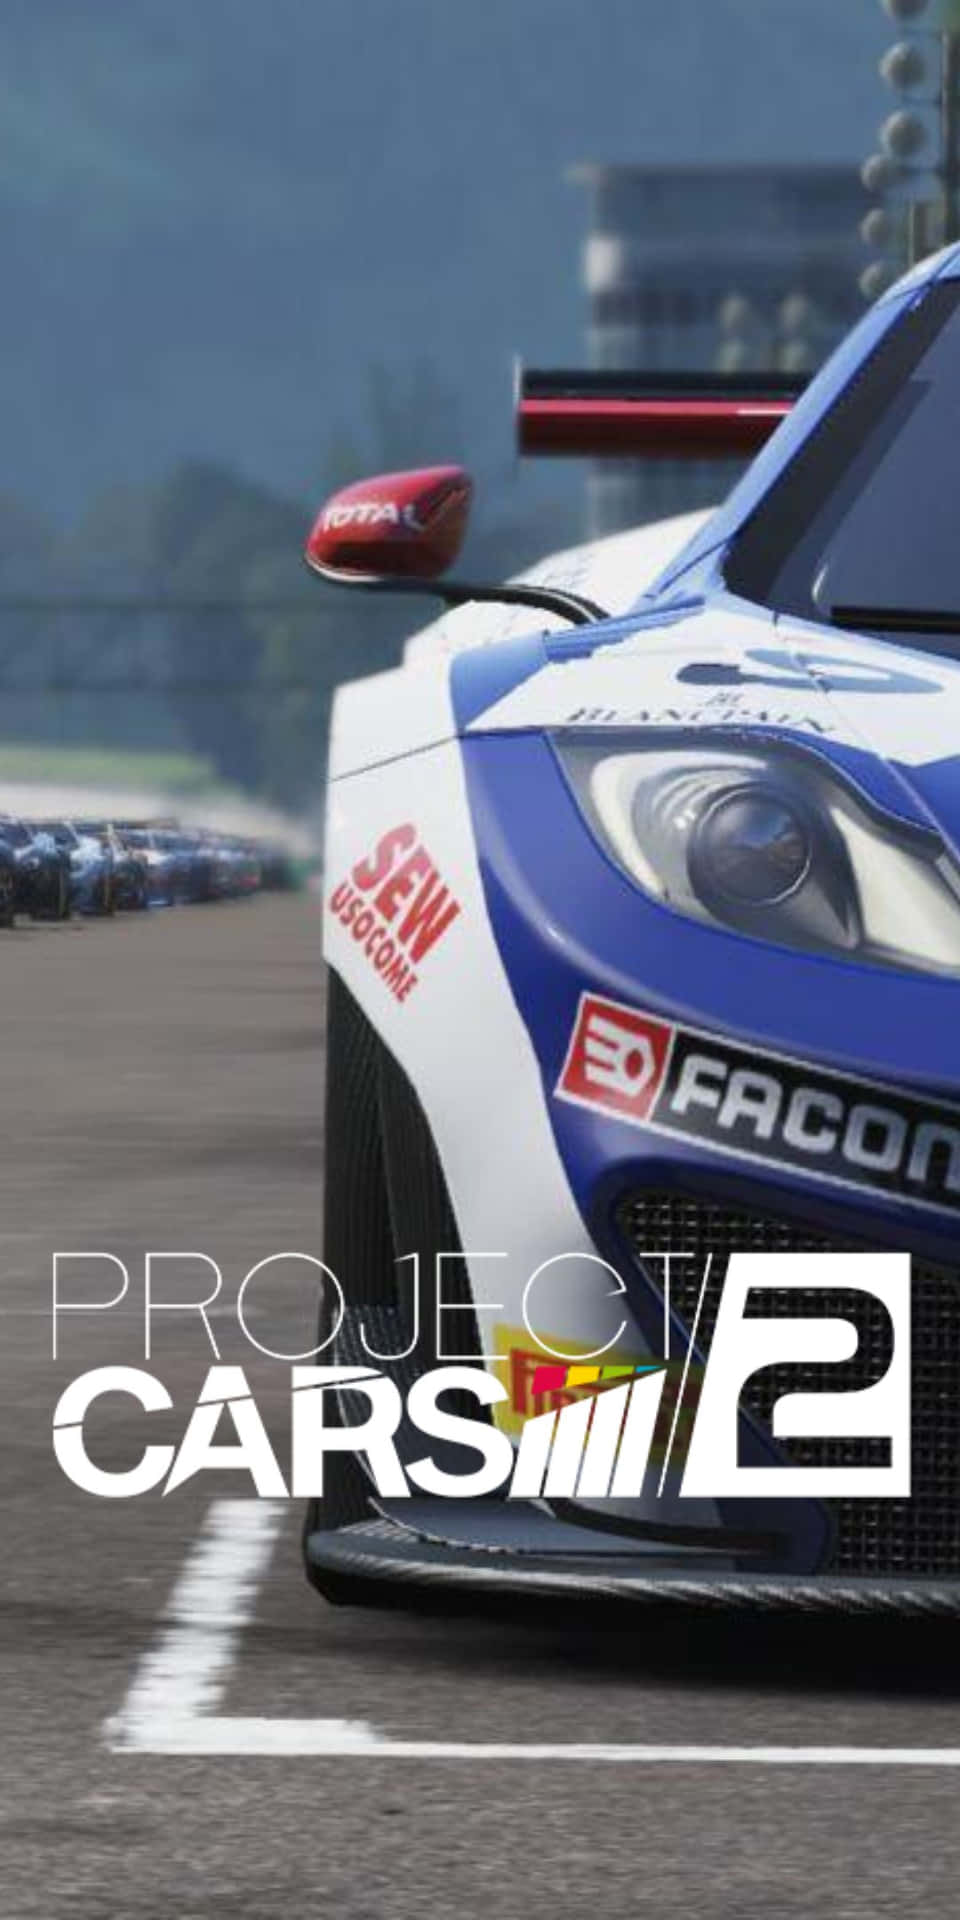 Sports Car In Race Track Pixel 3 Project Cars 2 Background